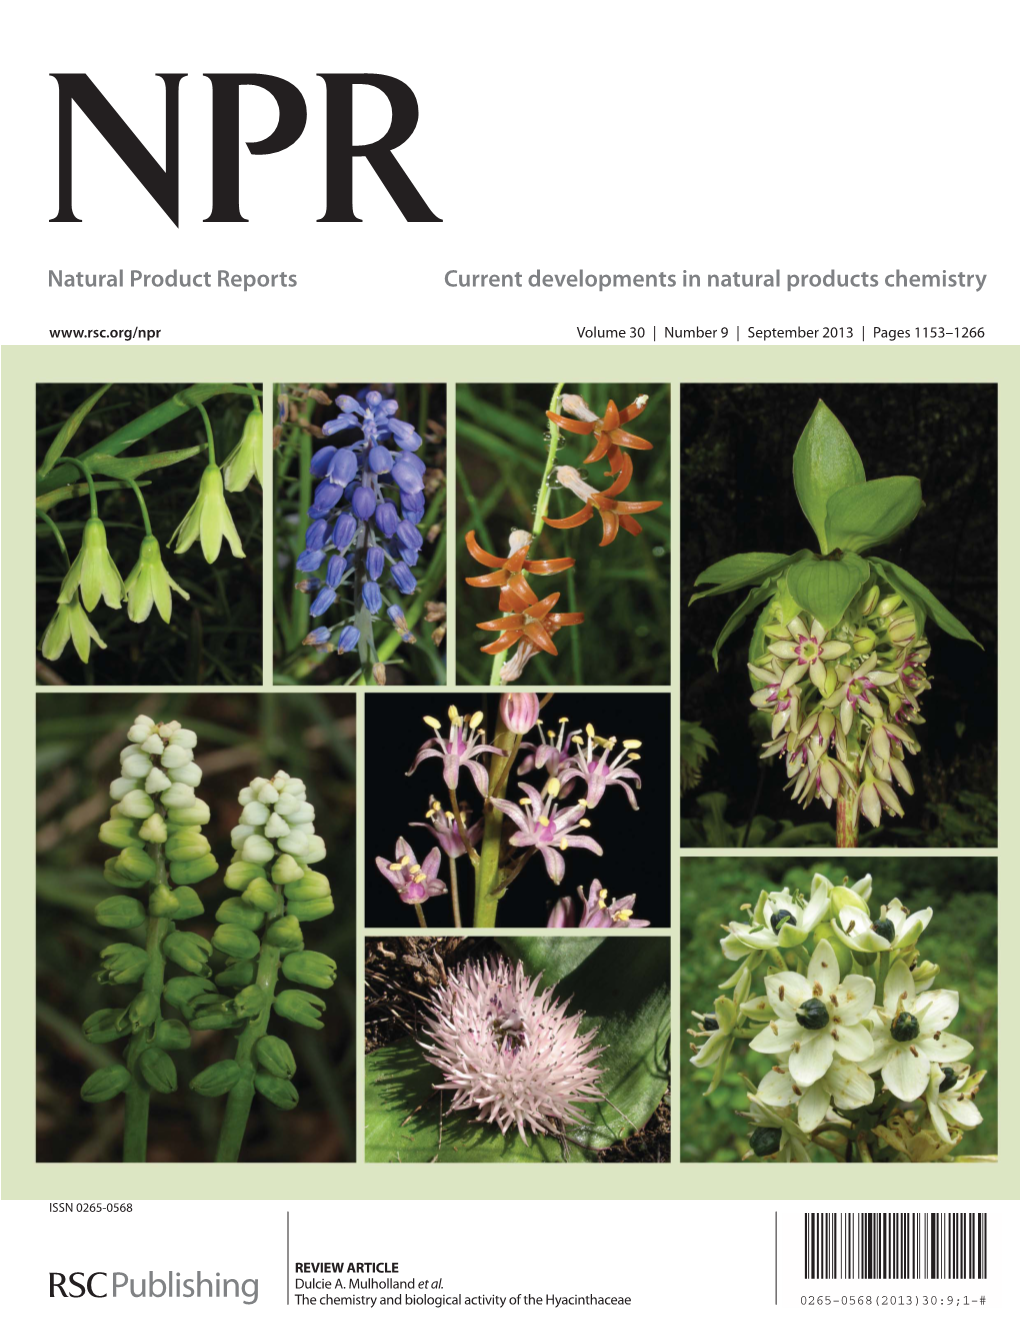 Natural Product Reports Current Developments in Natural Products Chemistry Volume 30 | Number 9 | September 2013 | Pages 1153–1266